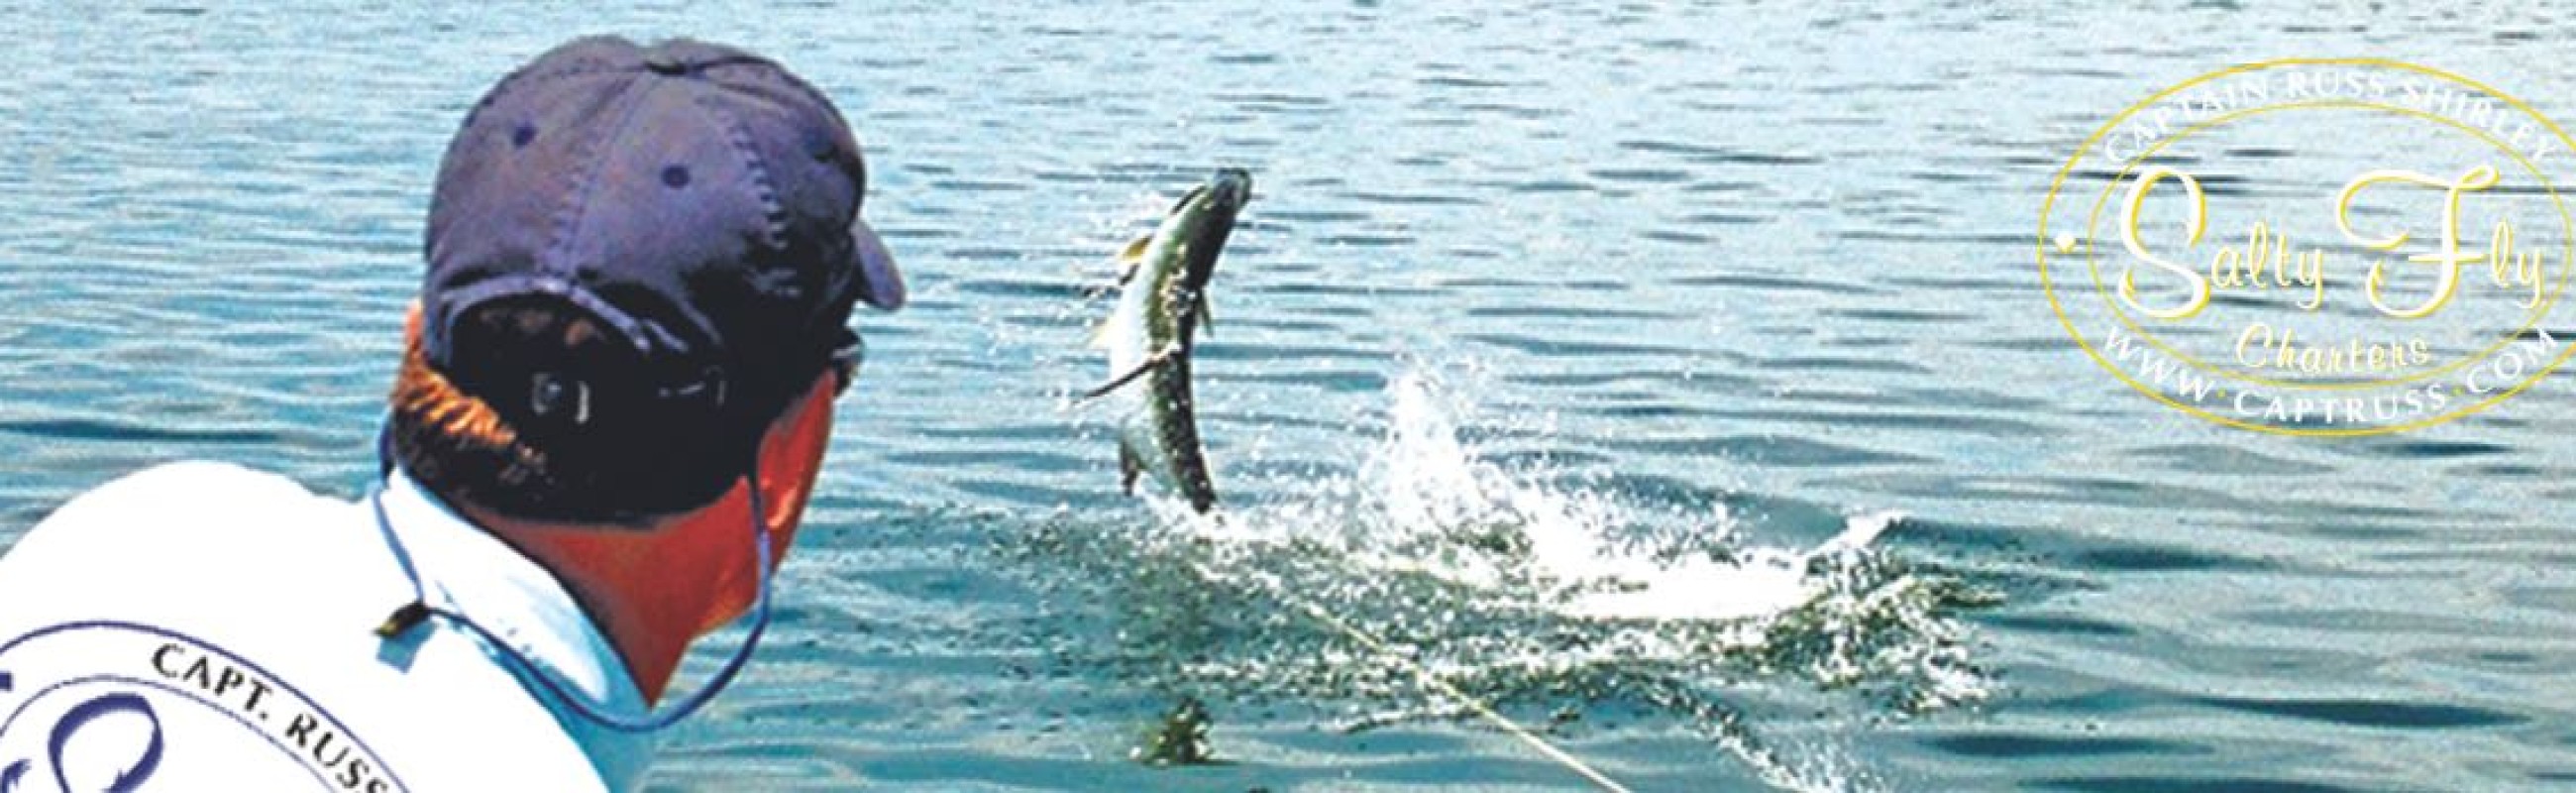 Fishing Capitol of World - Florida West Coast Tarpon Fly Fishing with Salty Fly Charters.